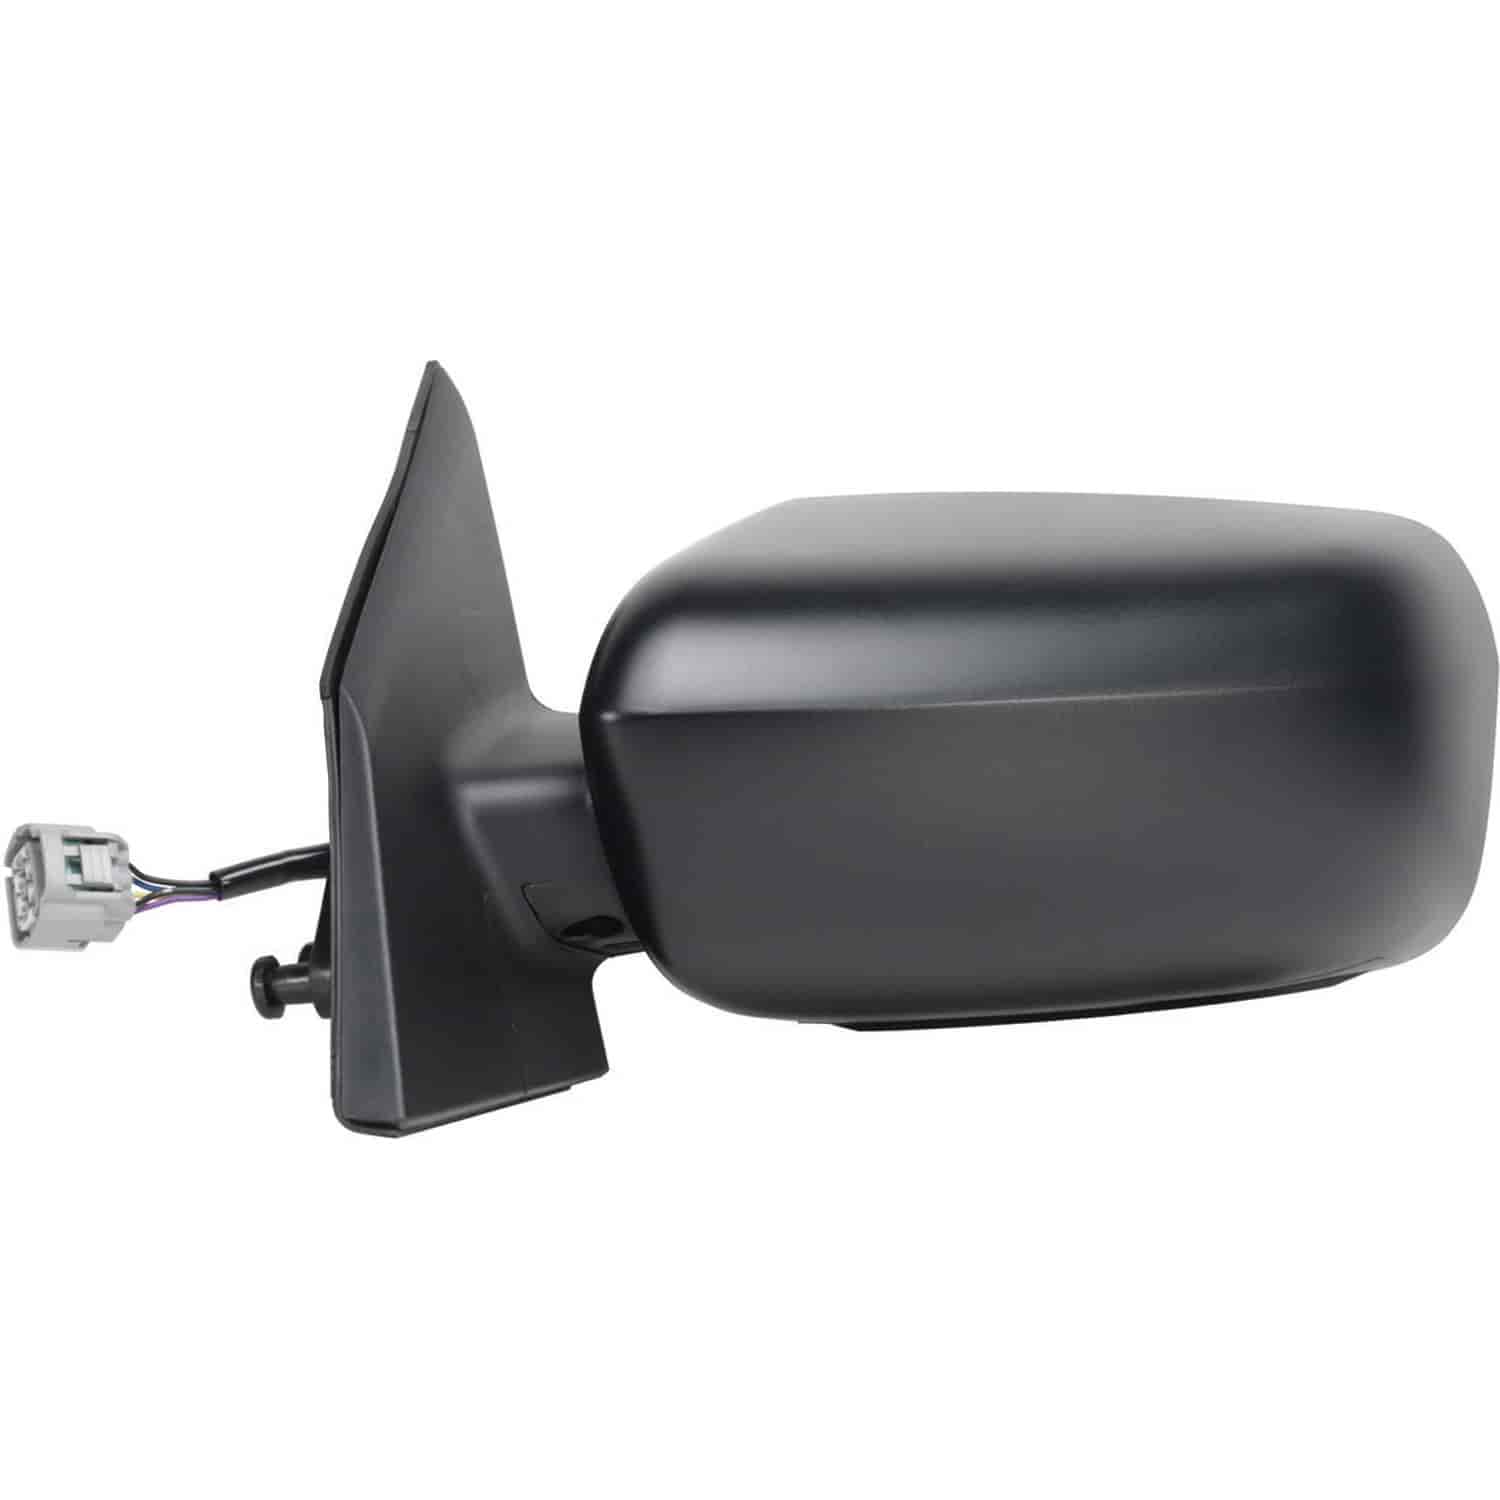 OEM Style Replacement mirror for 04-08 Mitsubishi Galant DE ES GTS LS driver side mirror tested to f